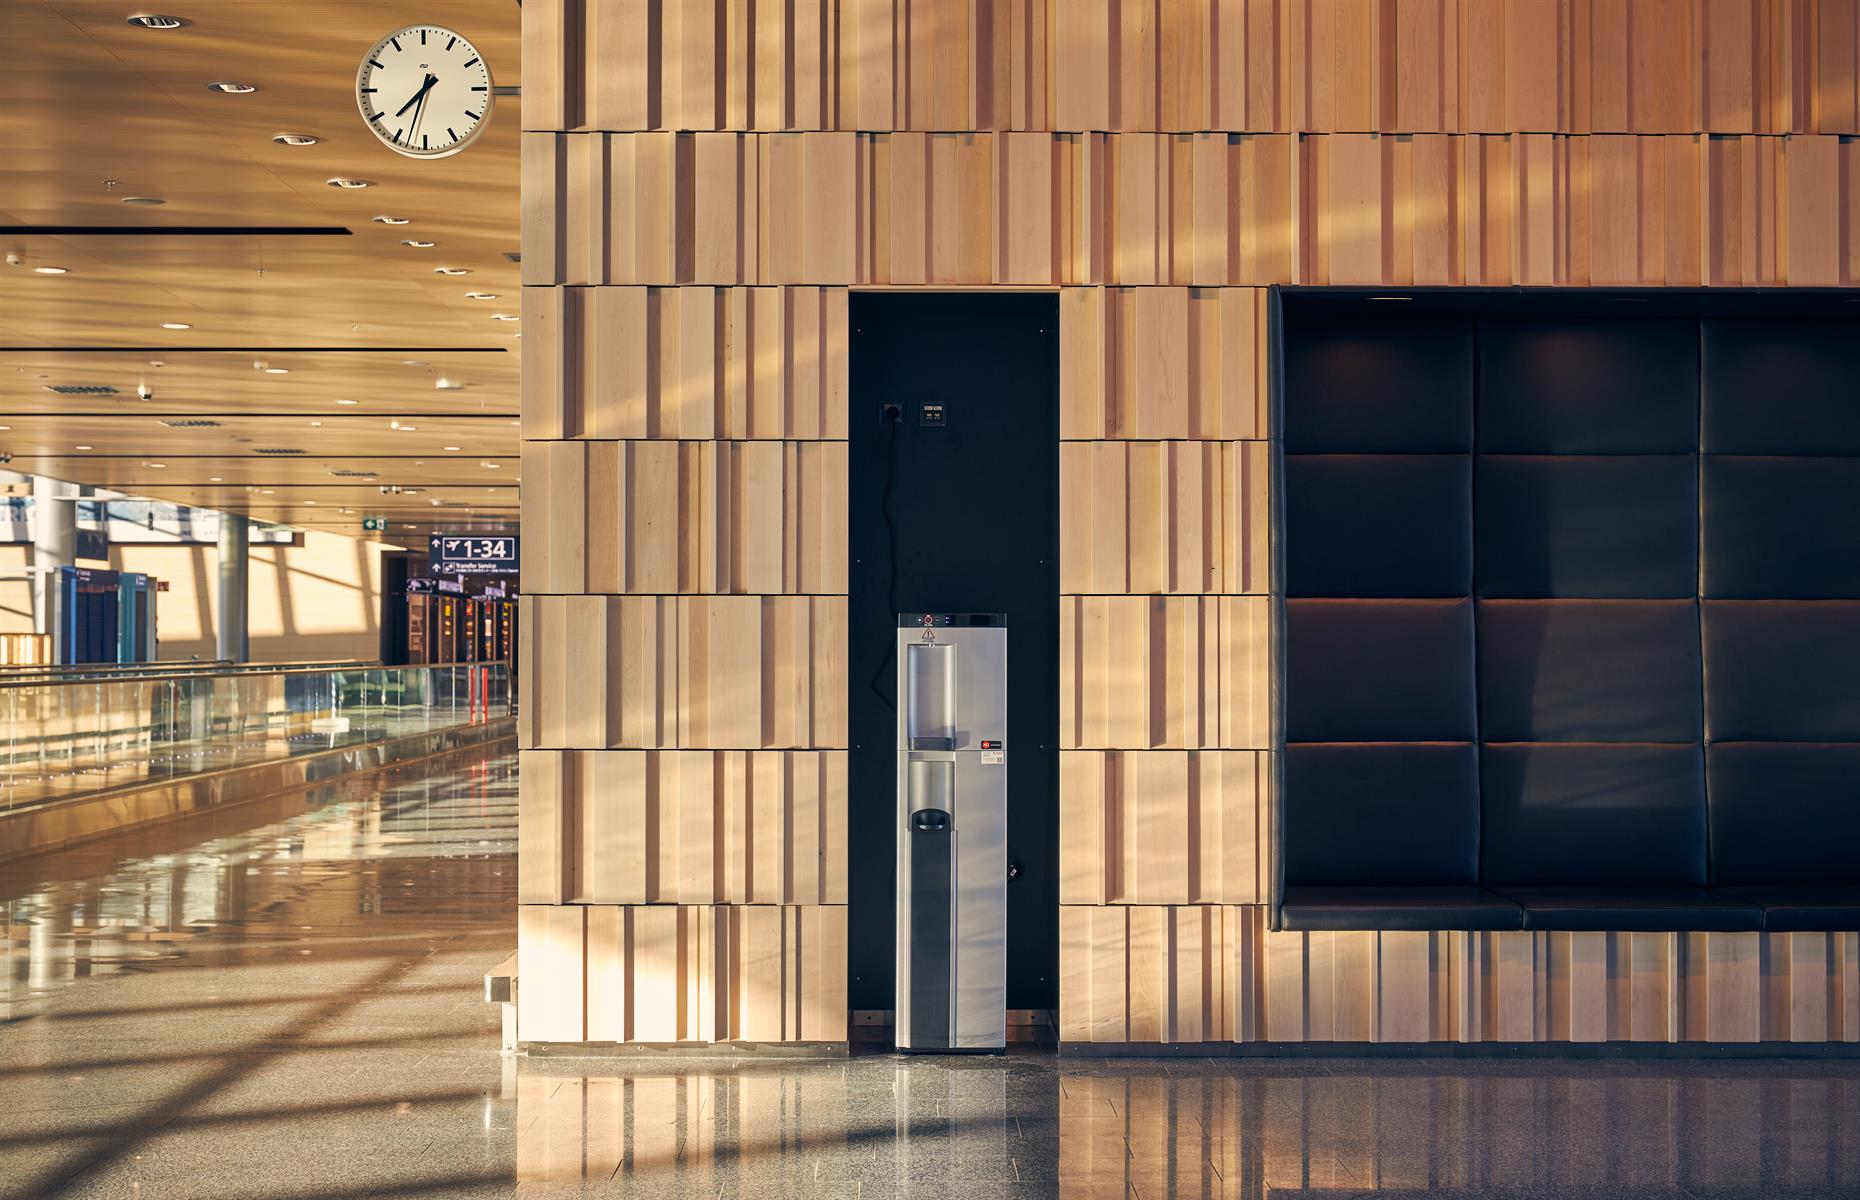 <p>Helsinki's airport incorporates some core principles of Finnish design, from minimalistic pine-covered walls to plenty of nooks you can curl up in with a book (or laptop). In fall 2023, another cozy wooden offering will appear at the departure gates: Relove, a coffee shop with an eco-conscious twist. It offers travelers a caffeine fix and the world's first <a href="https://www.finavia.fi/en/newsroom/2023/worlds-first-second-hand-concept-store-located-airport-open-helsinki-airport">second-hand store located inside an airport</a>.</p>